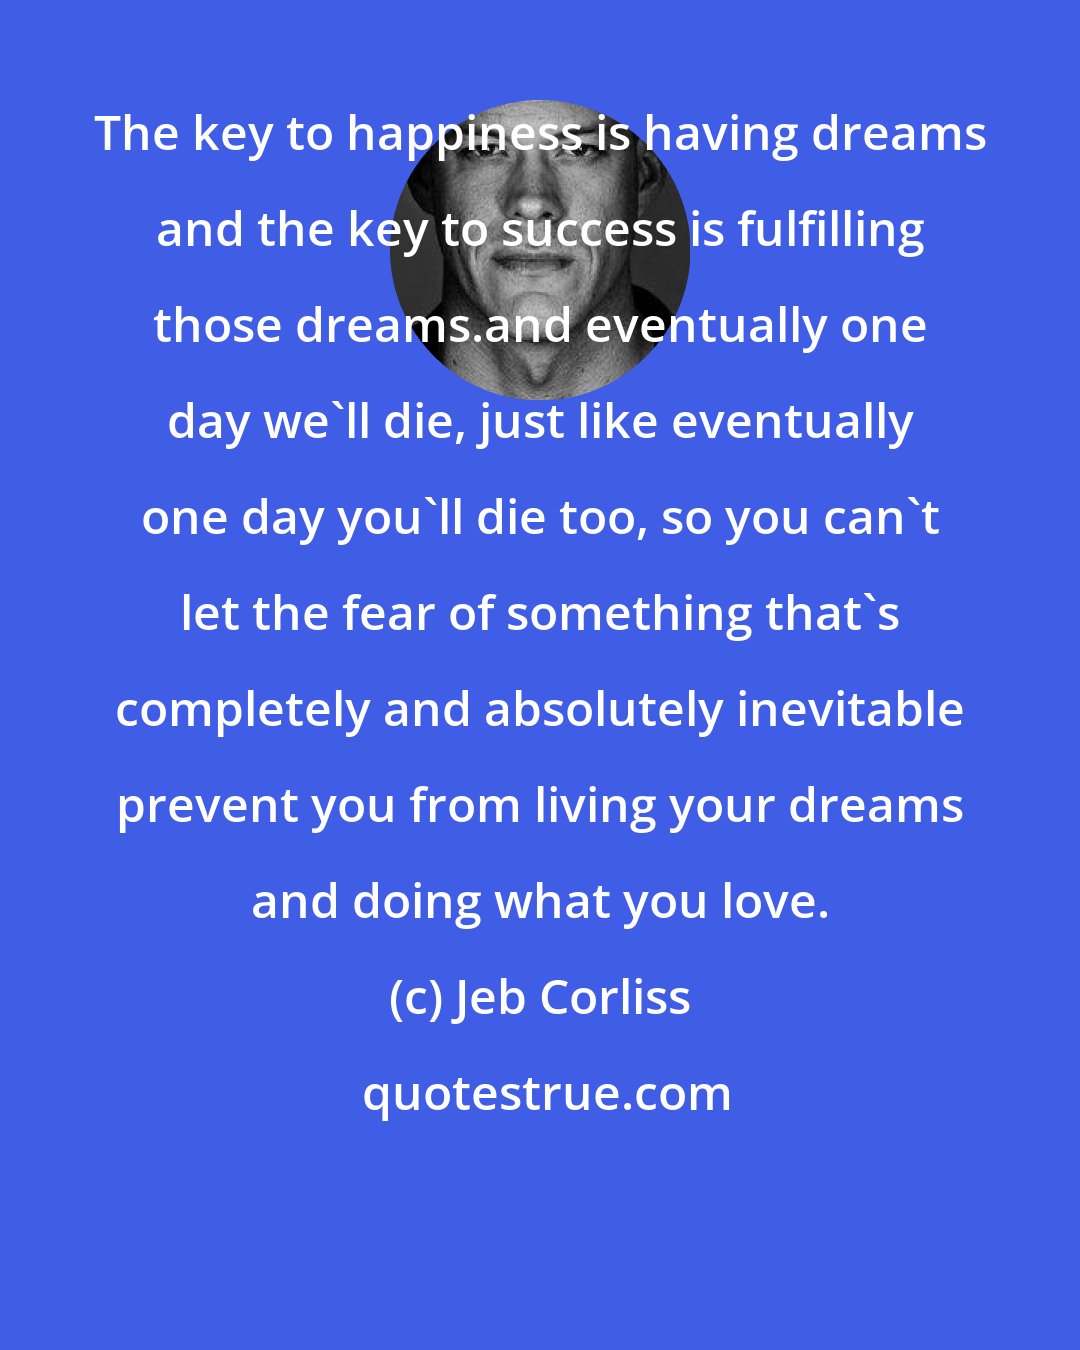 Jeb Corliss: The key to happiness is having dreams and the key to success is fulfilling those dreams.and eventually one day we'll die, just like eventually one day you'll die too, so you can't let the fear of something that's completely and absolutely inevitable prevent you from living your dreams and doing what you love.